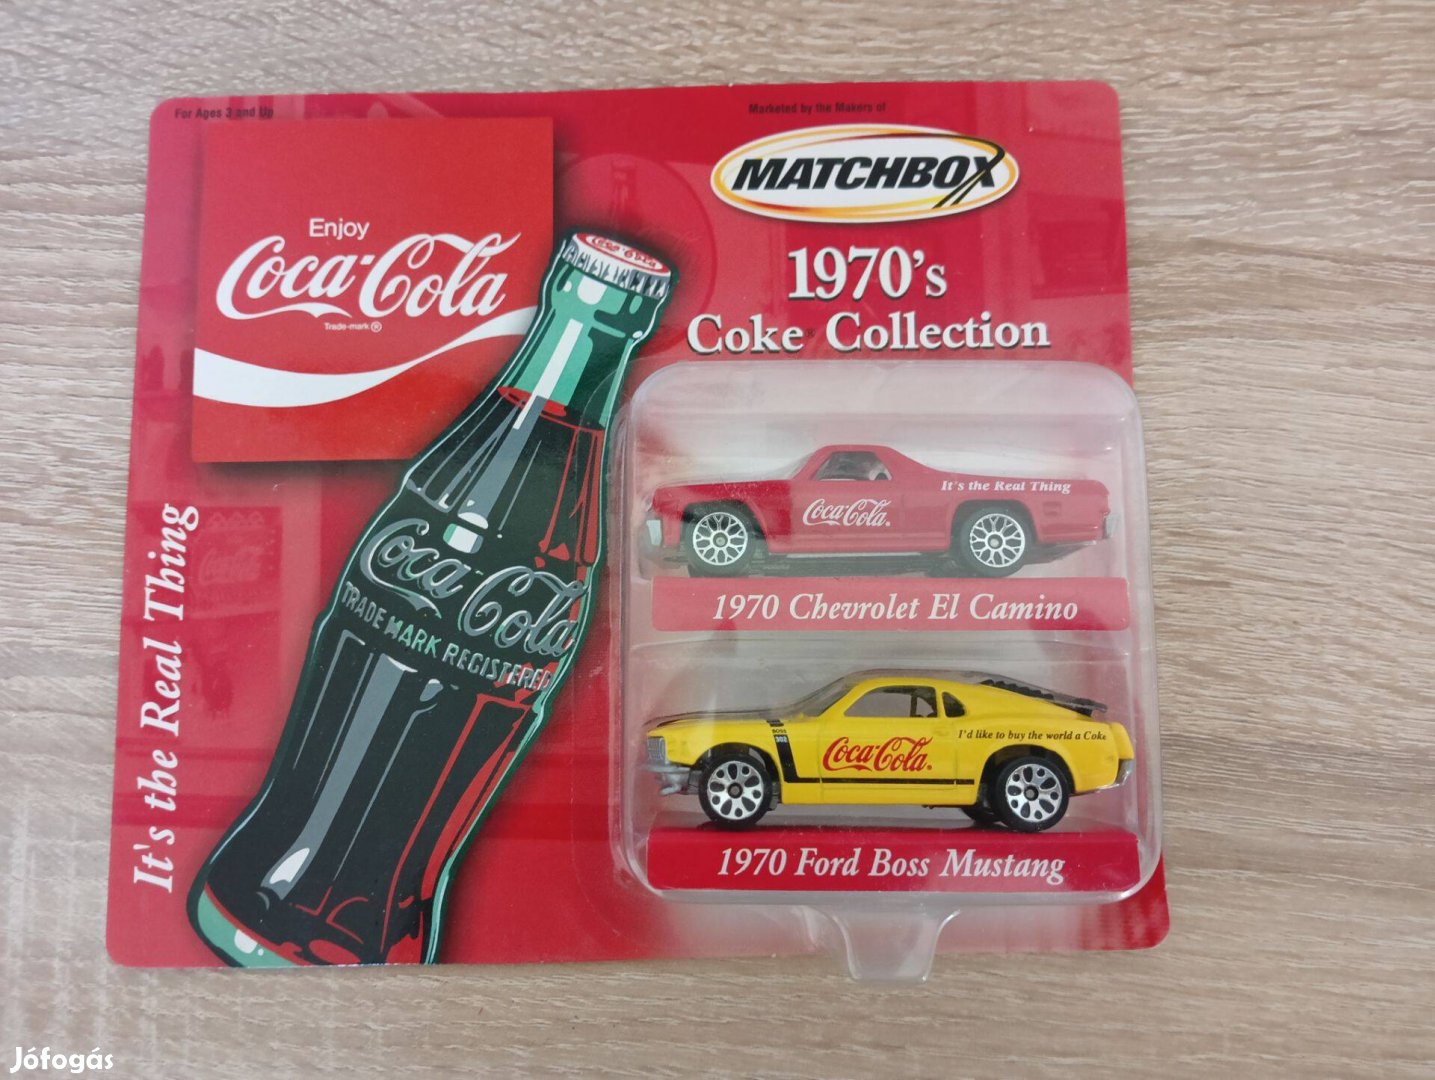 Matchbox 50 Coke Collection Twin Packs